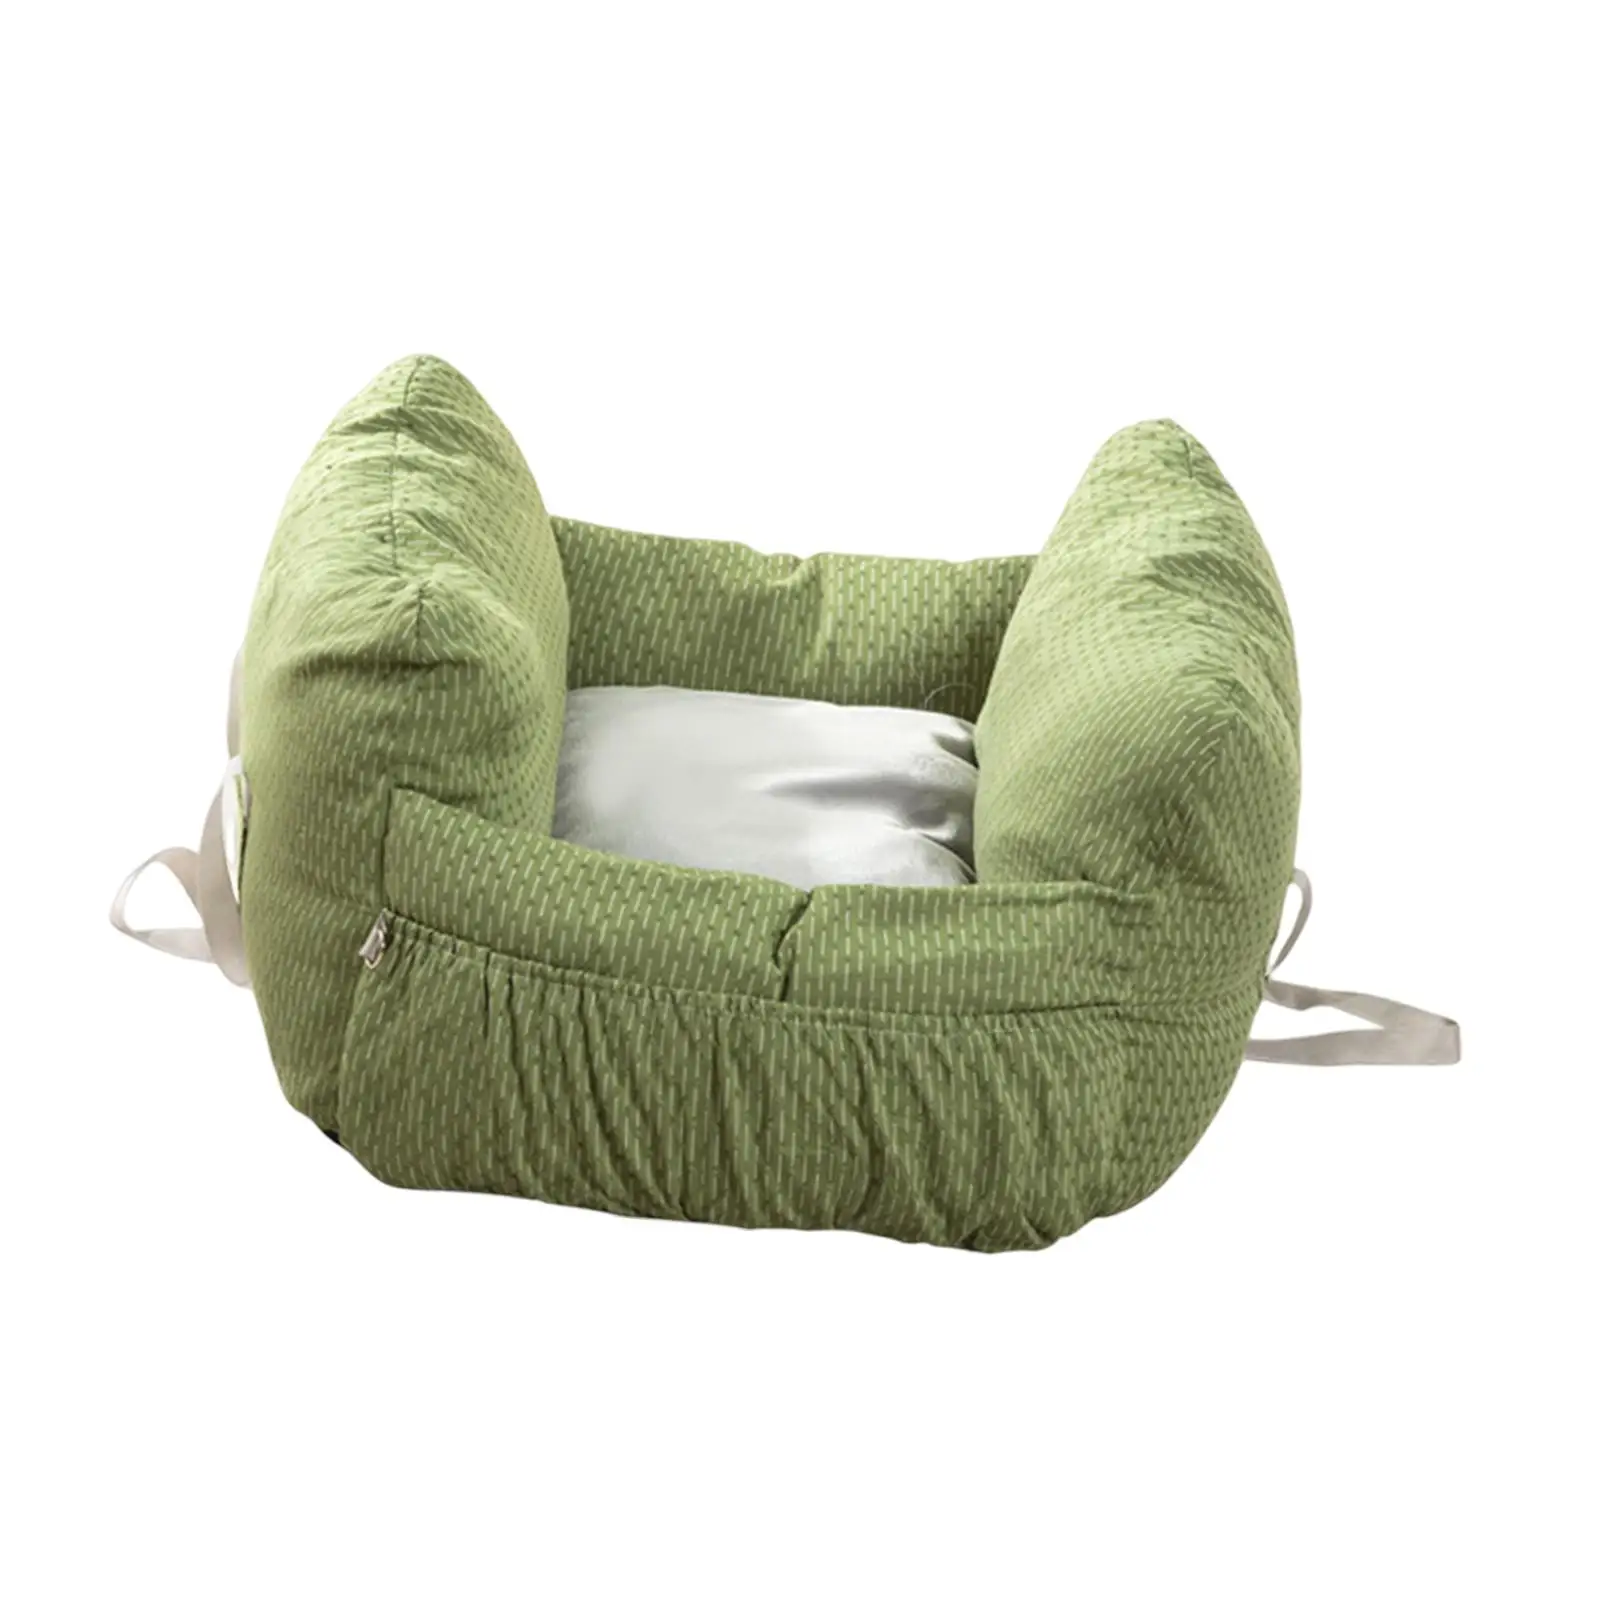 Dog Car Seat Pet Seat Sofa Comfortable Non Slip Portable Pet Carrier Kennel for Small and Medium Dogs Pets Supplies